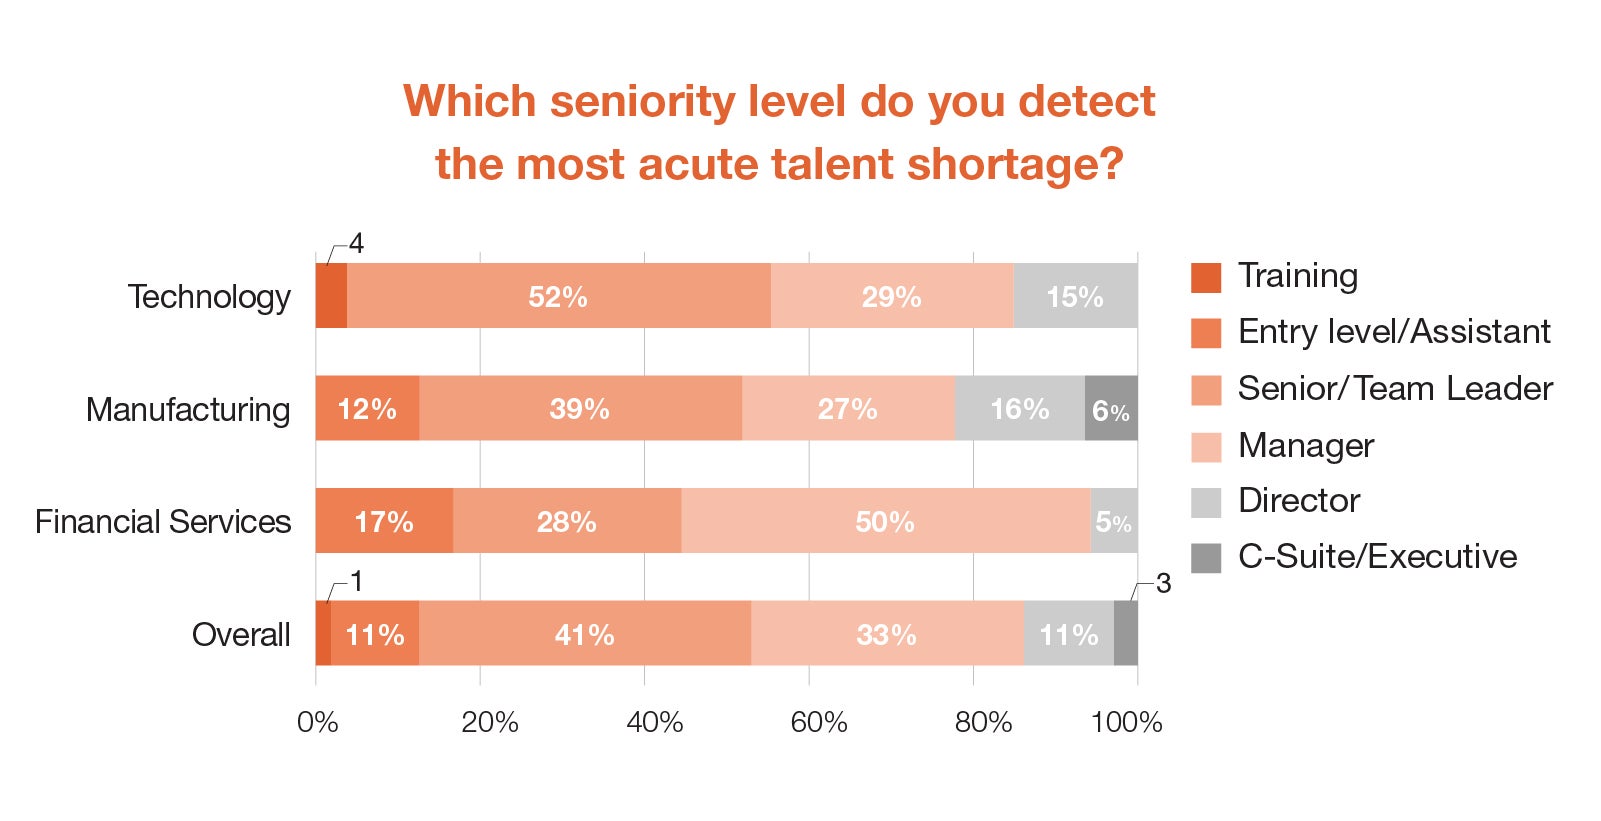 Which seniority level do you detect the most acute talent shortage?